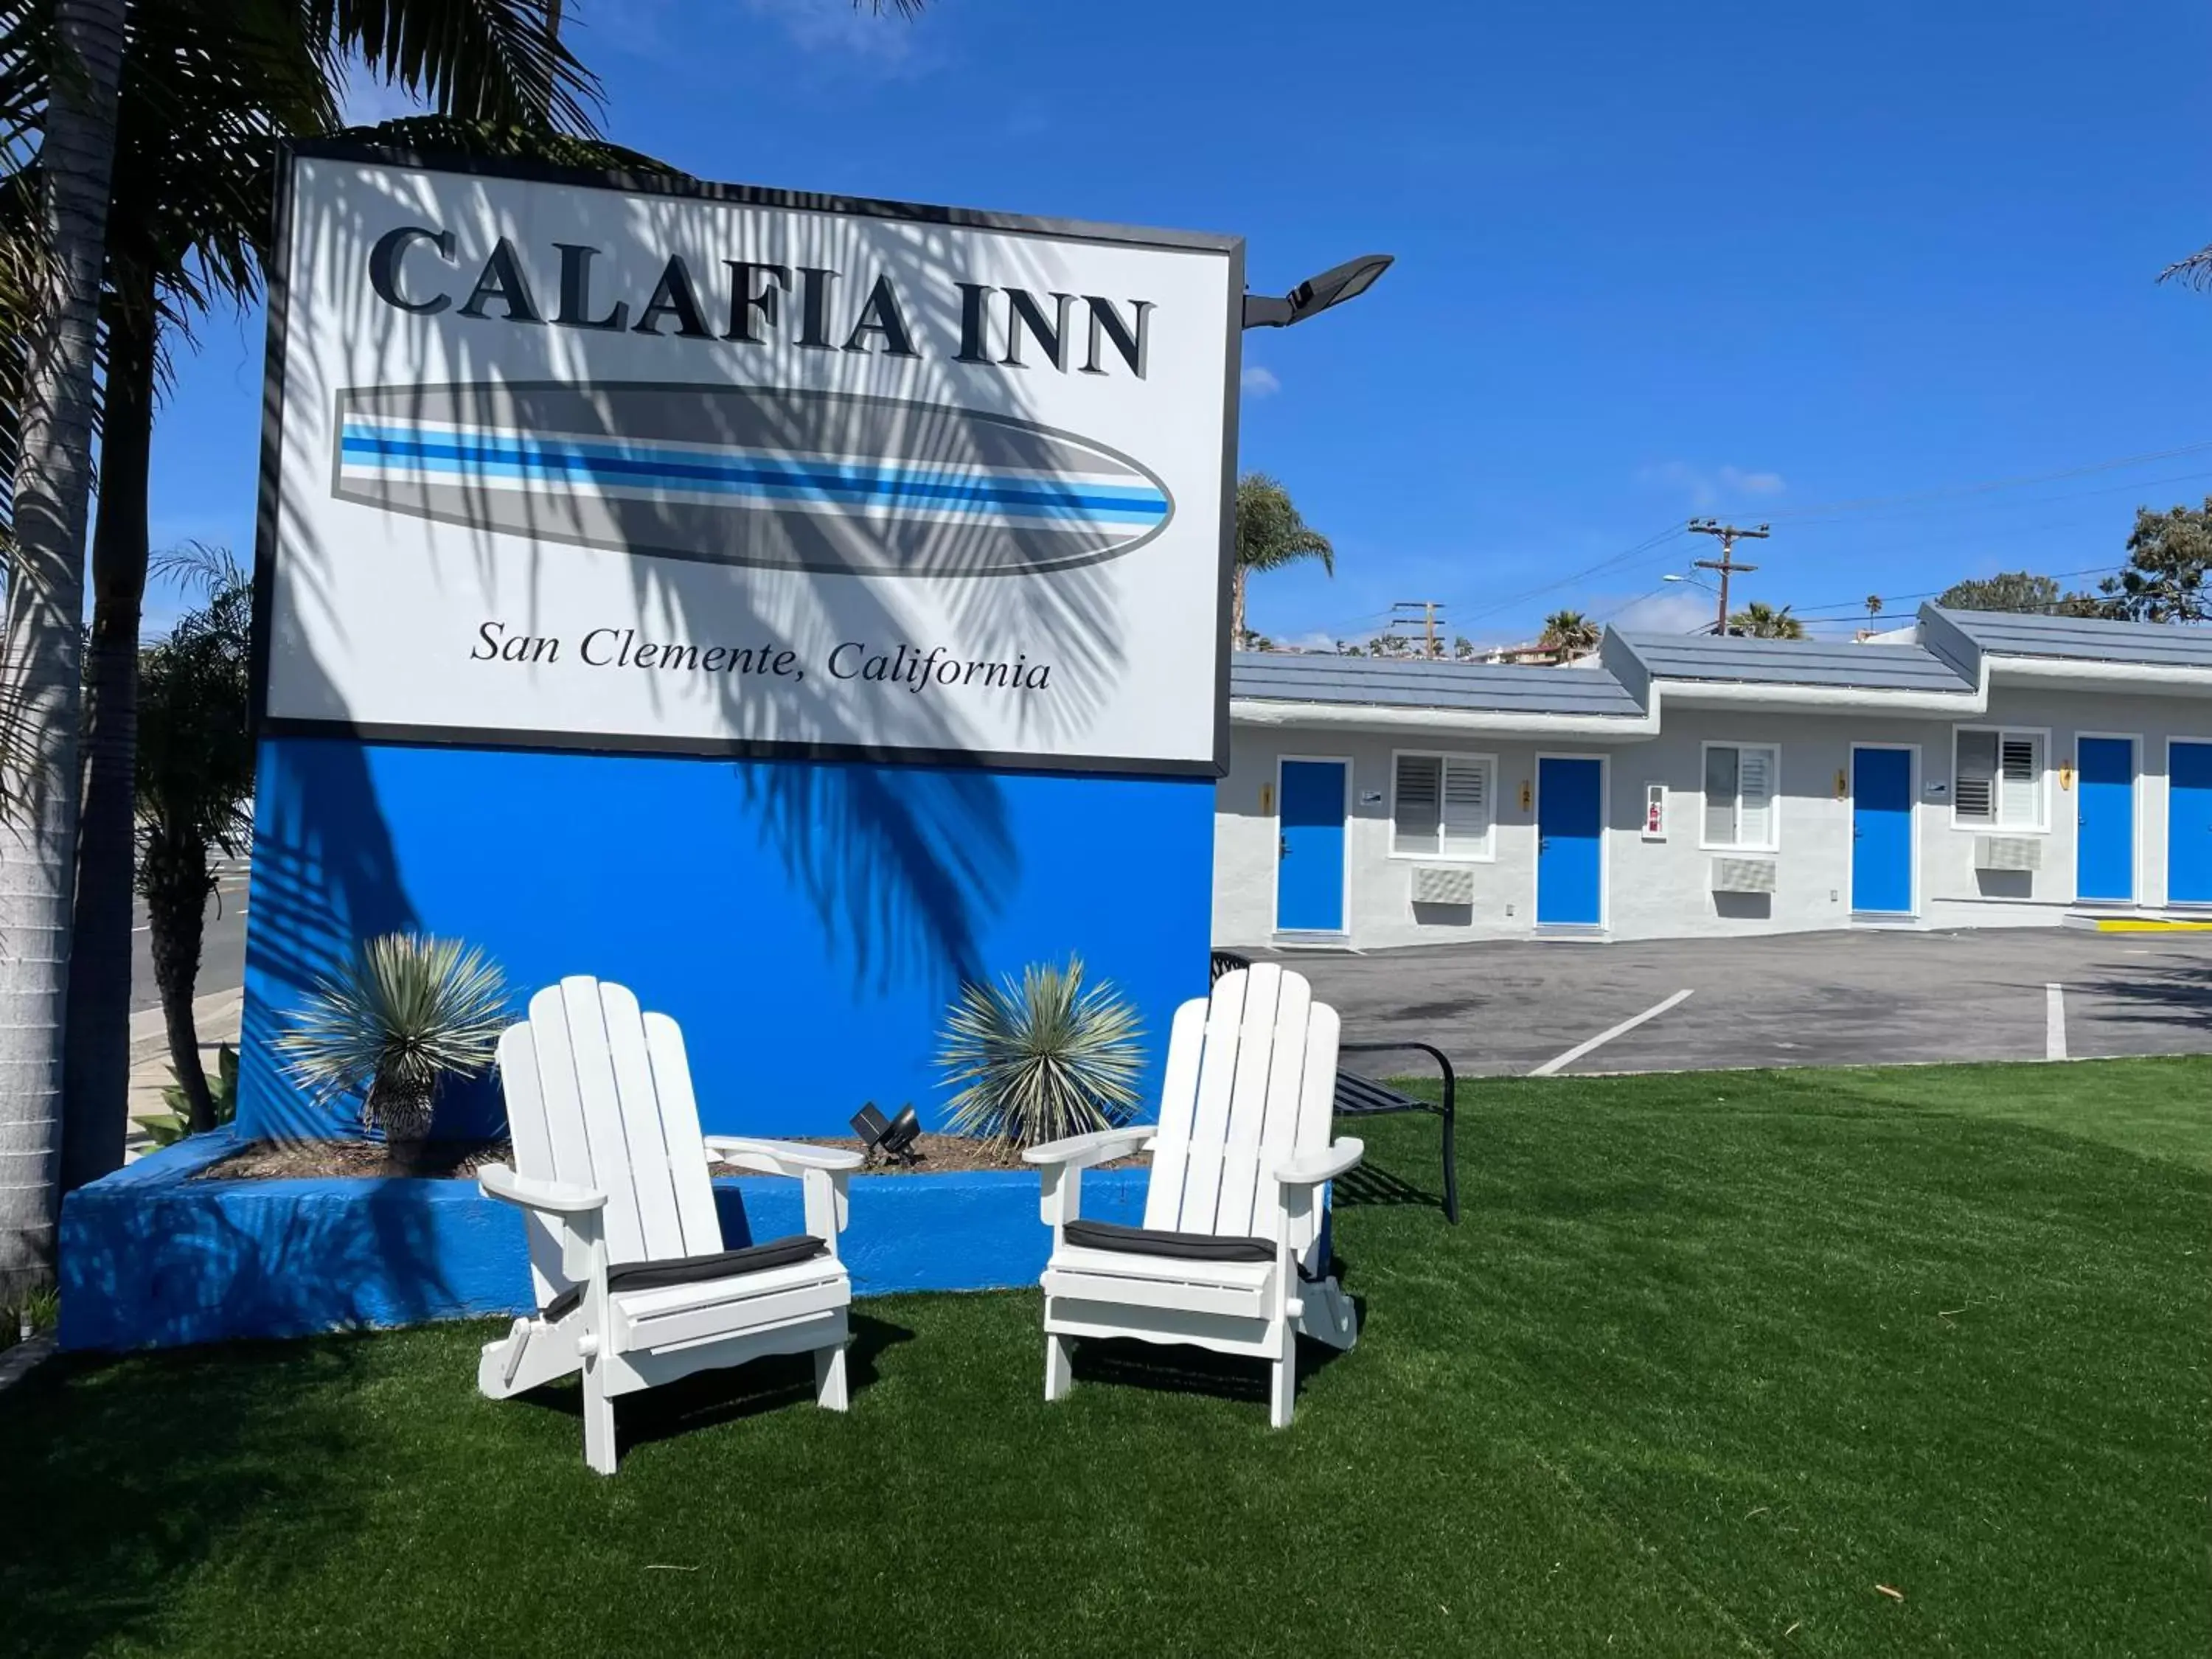 Parking, Property Building in Calafia Inn San Clemente Newly renovated